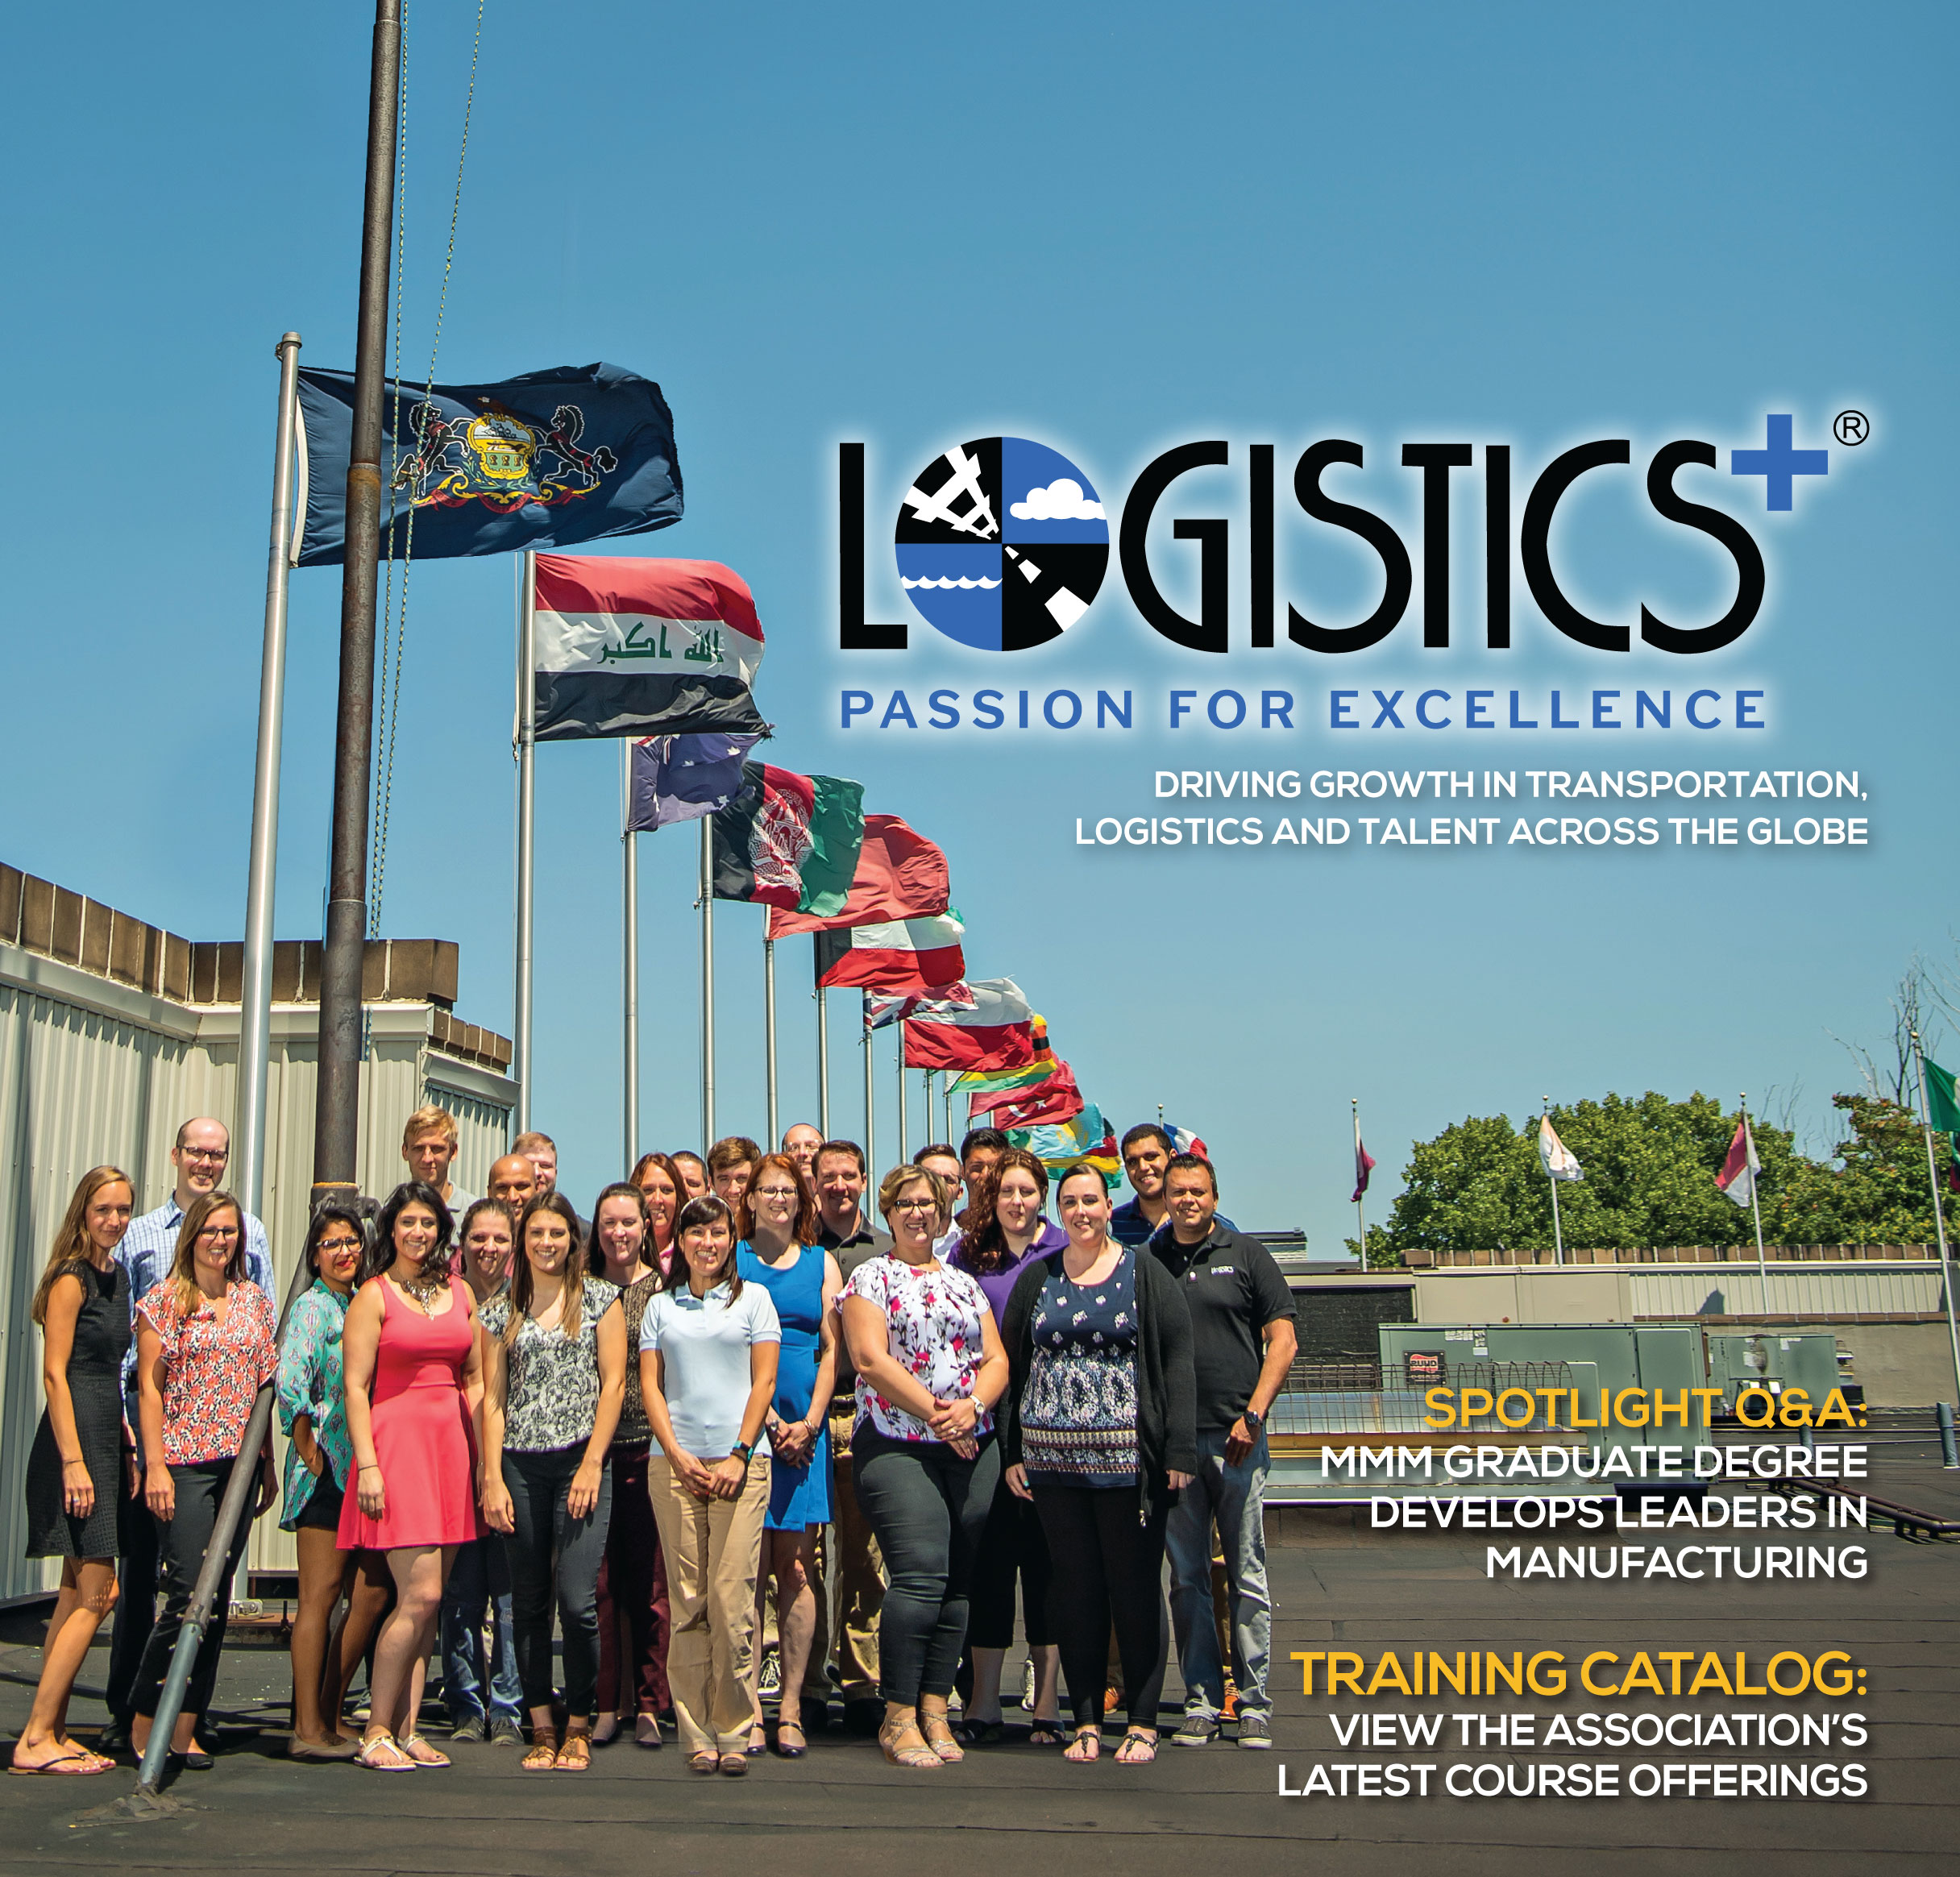 Logistics Plus featured in the September 2018 edition of Business Magazine